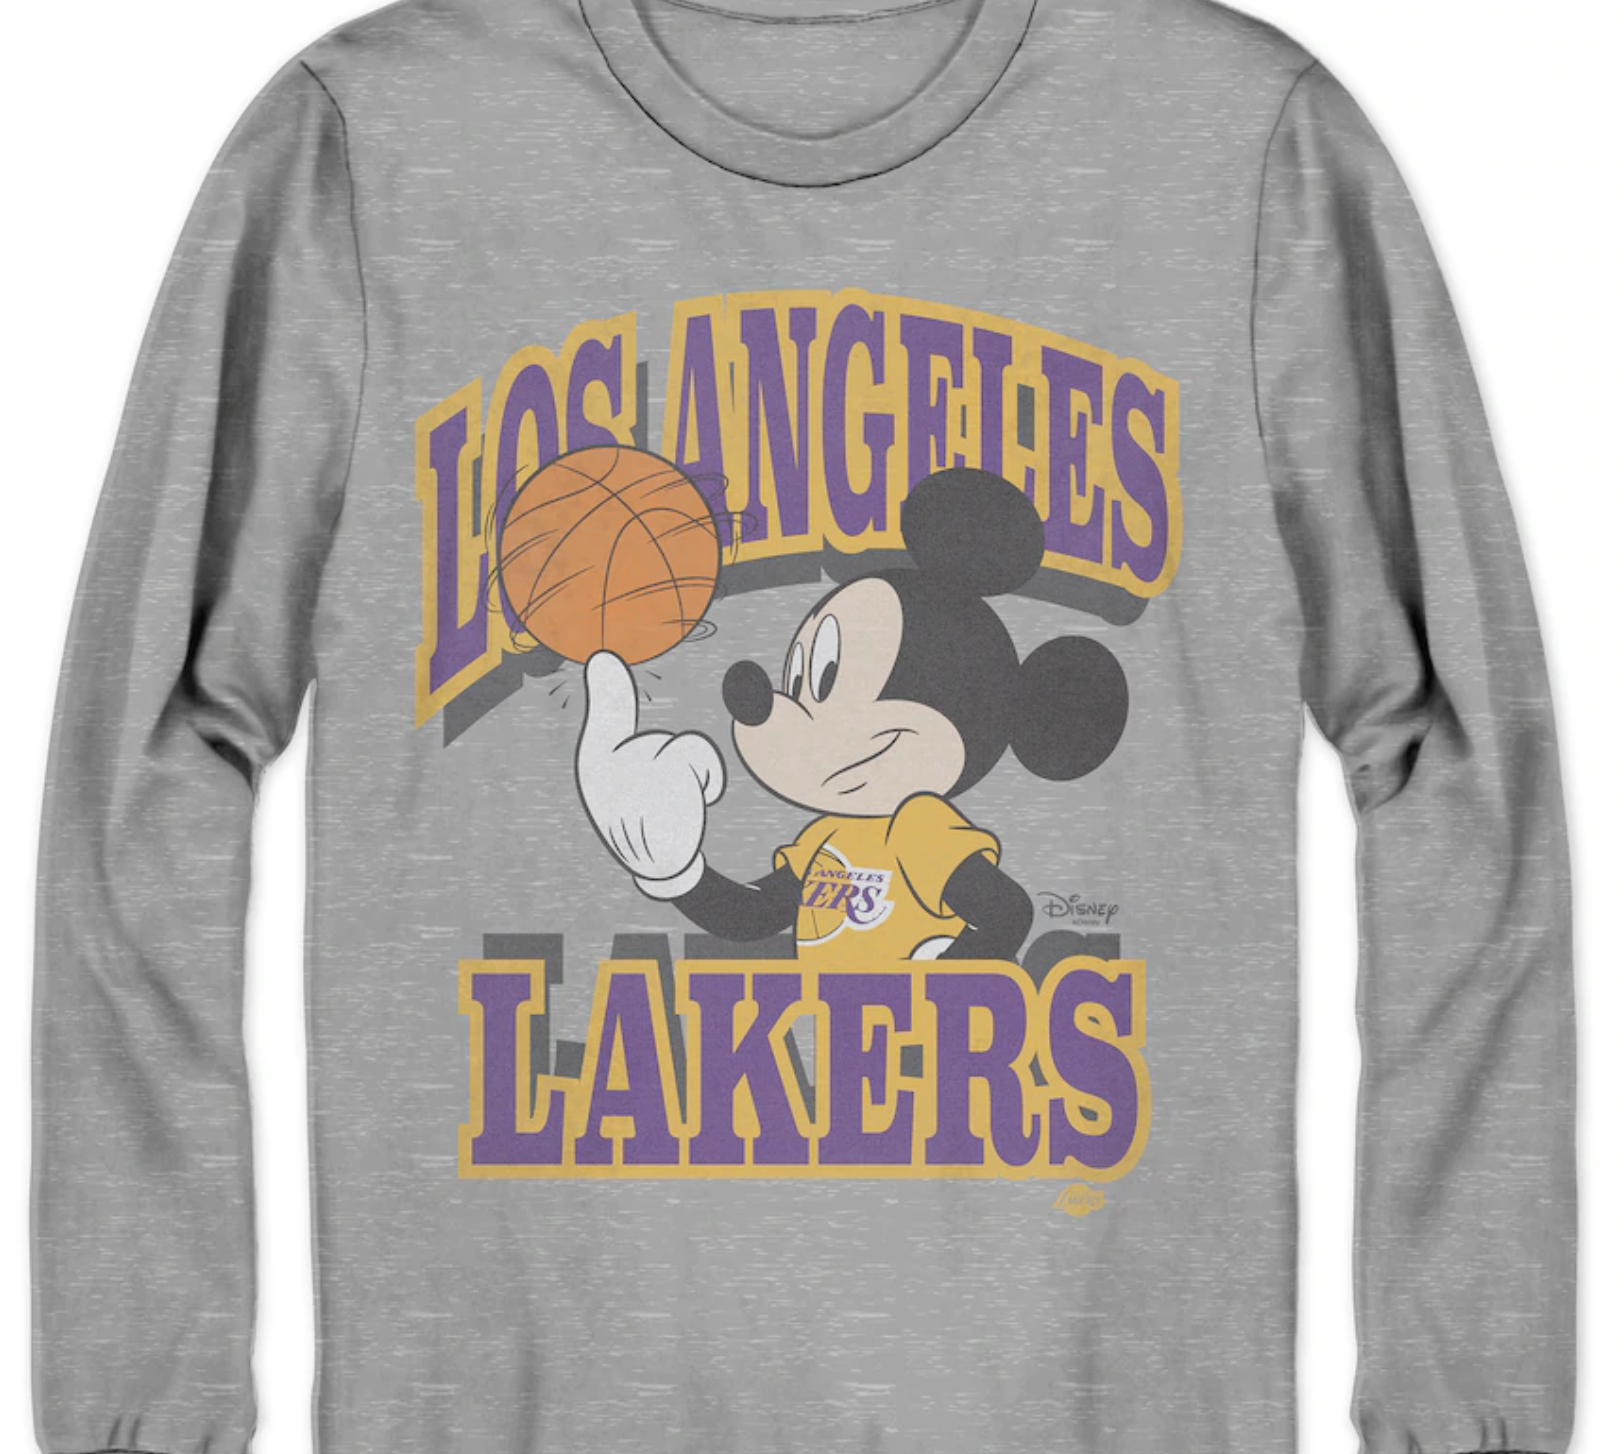 Mickey Mouse NBA Experience Pin – Los Angeles Lakers | shopDisney